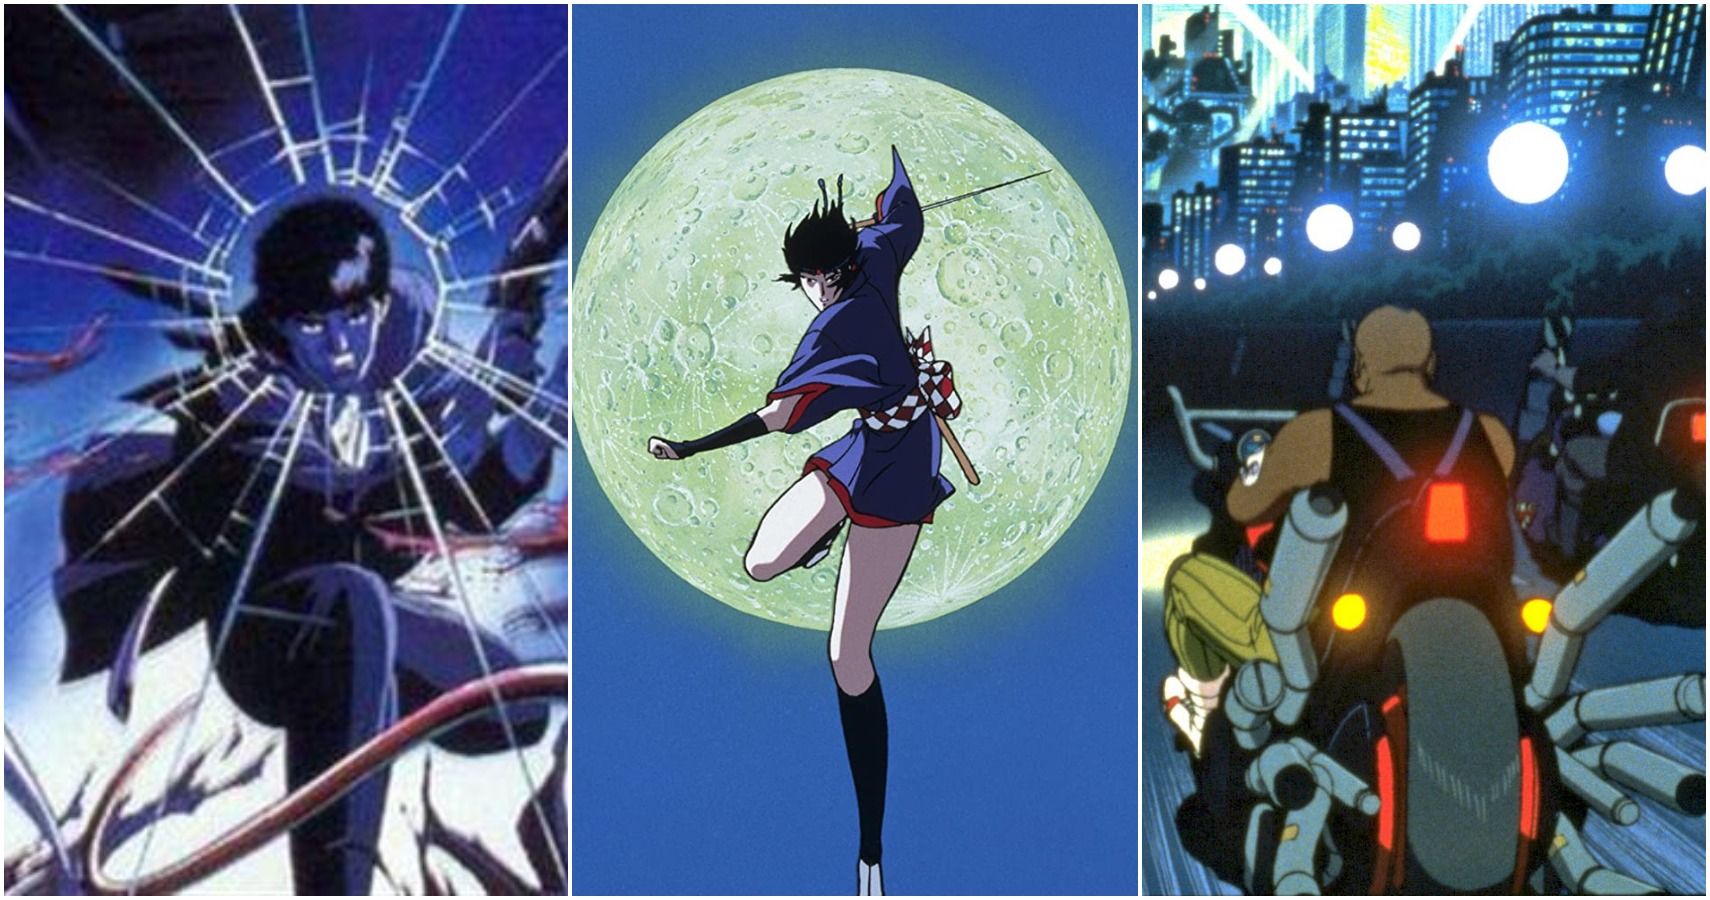 The 10 Best Standalone Anime Movies of the 2010s According to MyAnimeList